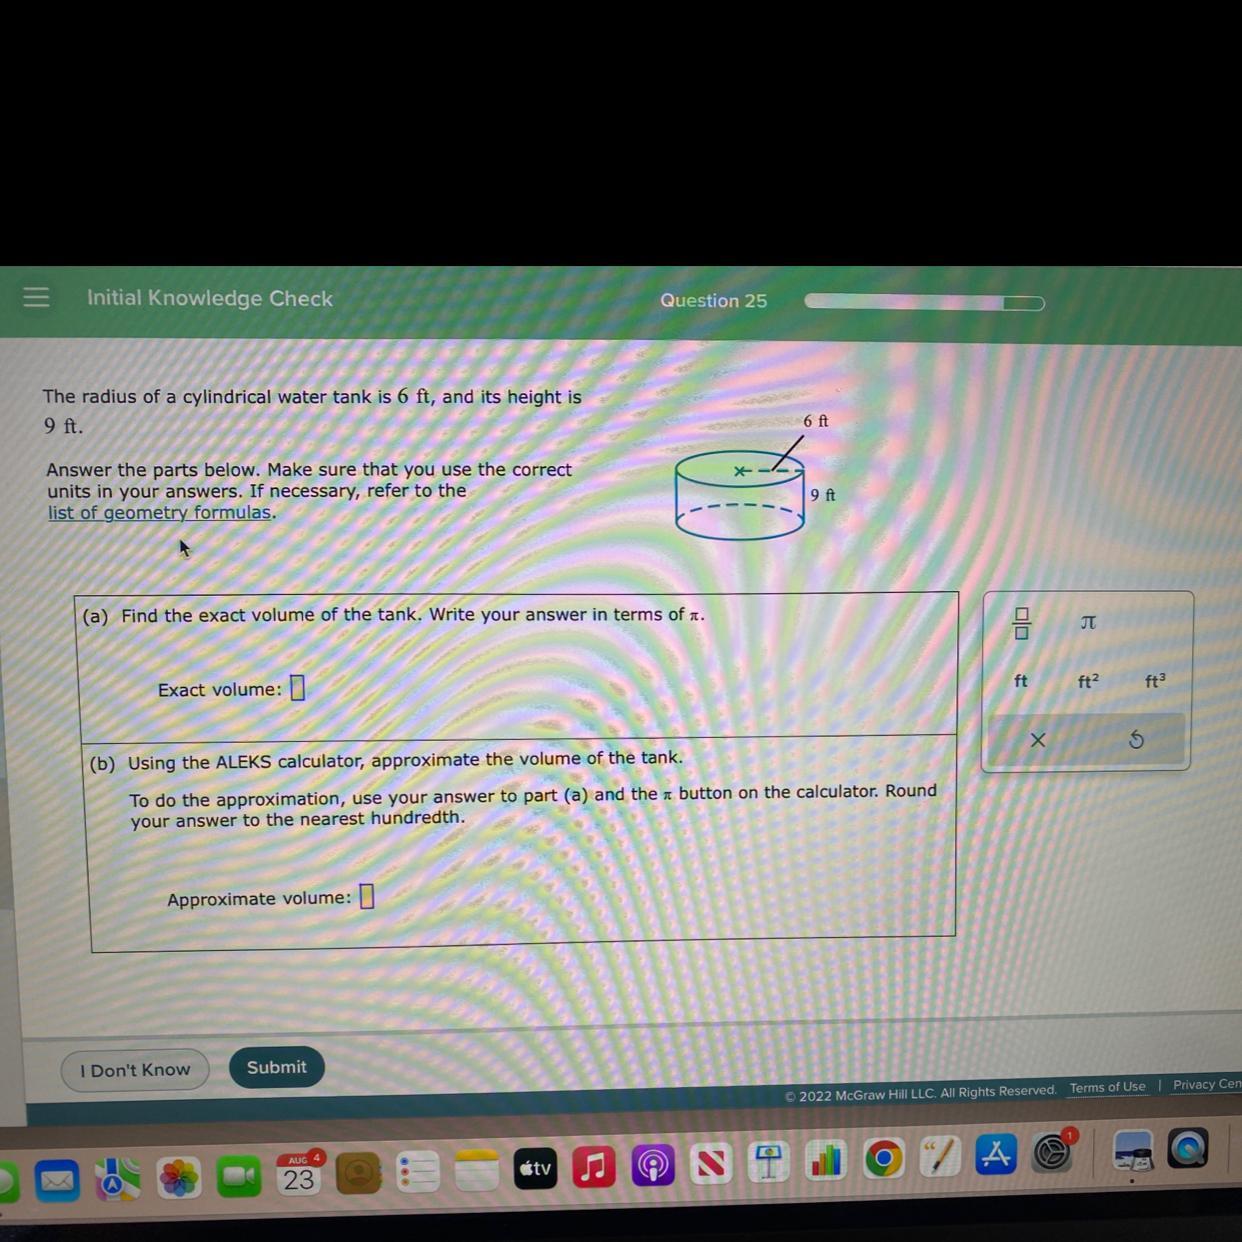 Please Help Me Resolve This, Im Not Able Part (a)